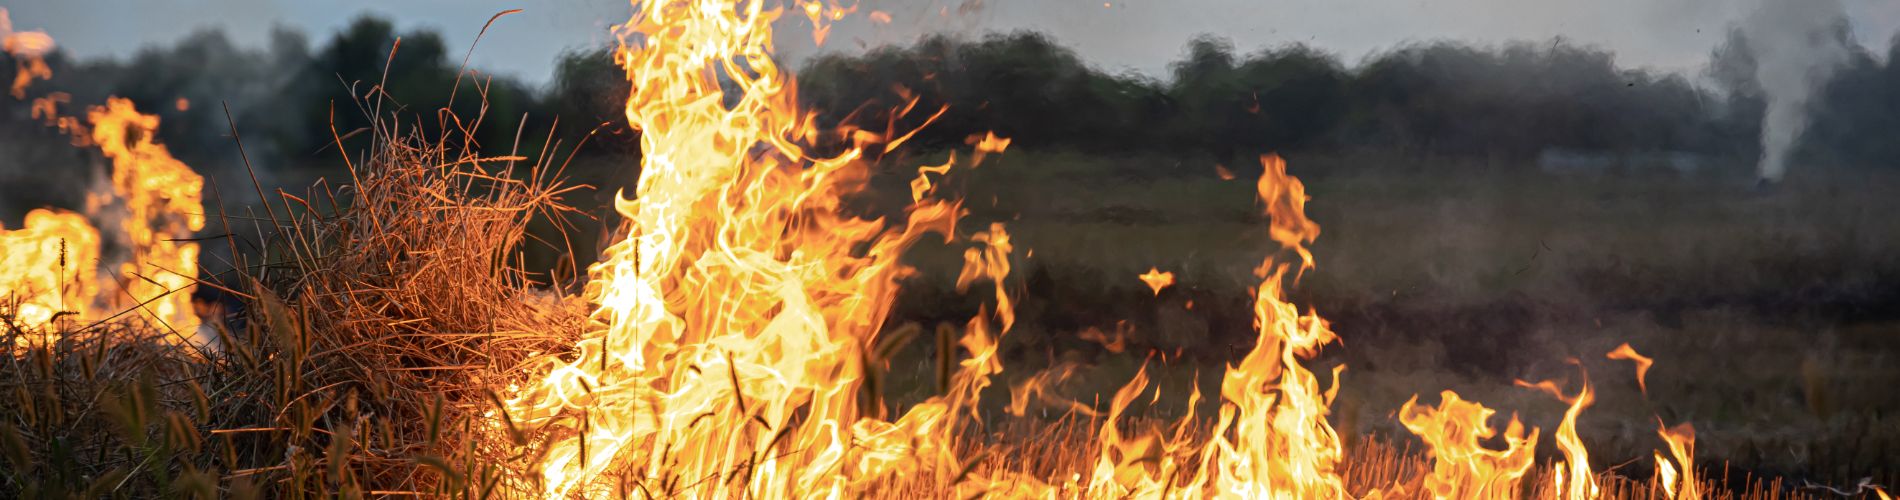 fire-steppe-grass-is-burning-destroying-everything-its-path